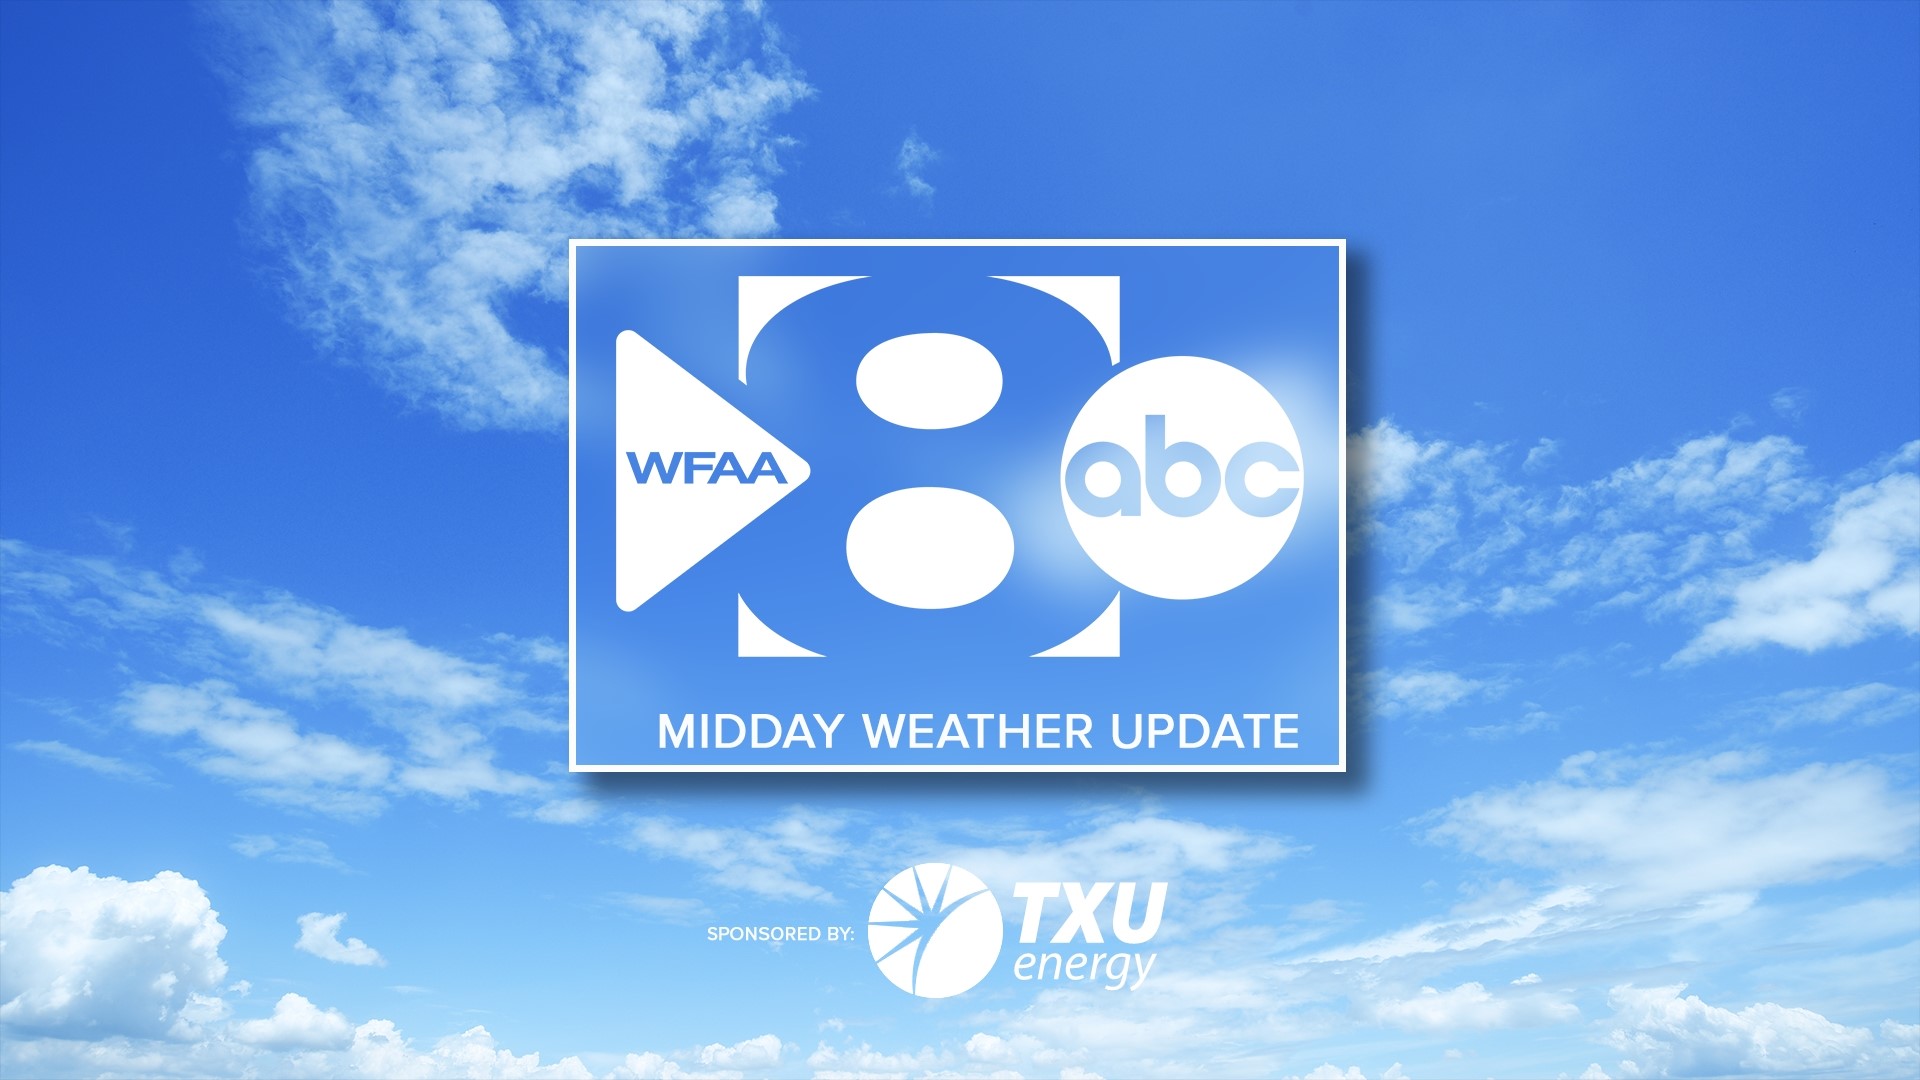 DFW Weather: Sept. 26 midday forecast update